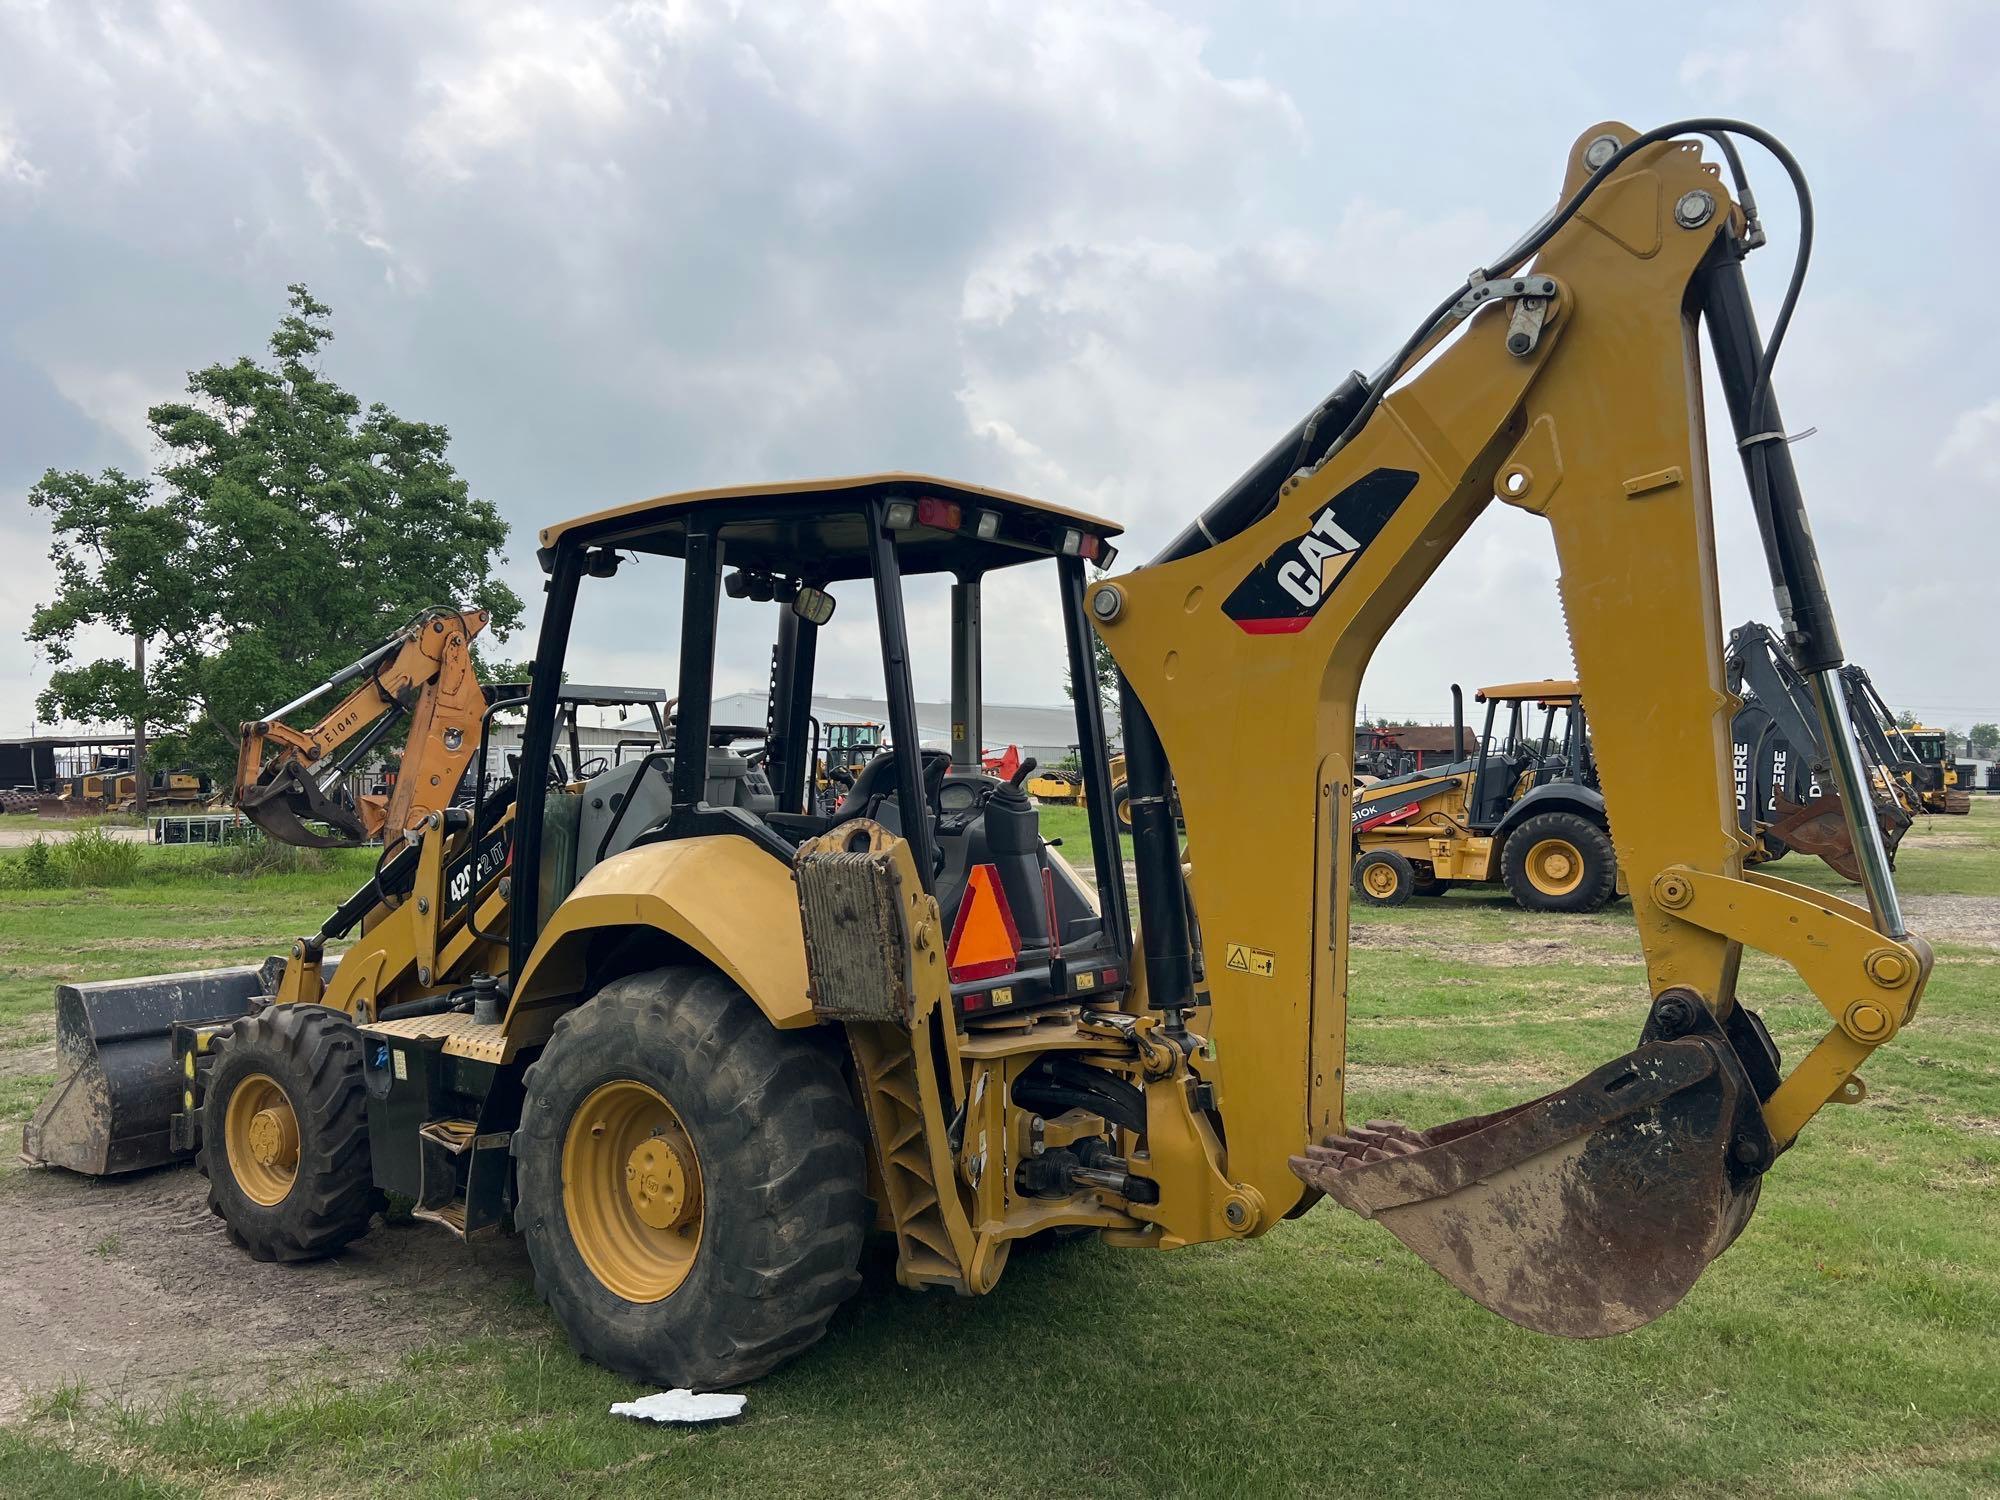 2017 CAT 420F2IT TRACTOR LOADER BACKHOE SN:HWD02253 4x4, powered by Cat diesel engine, equipped with